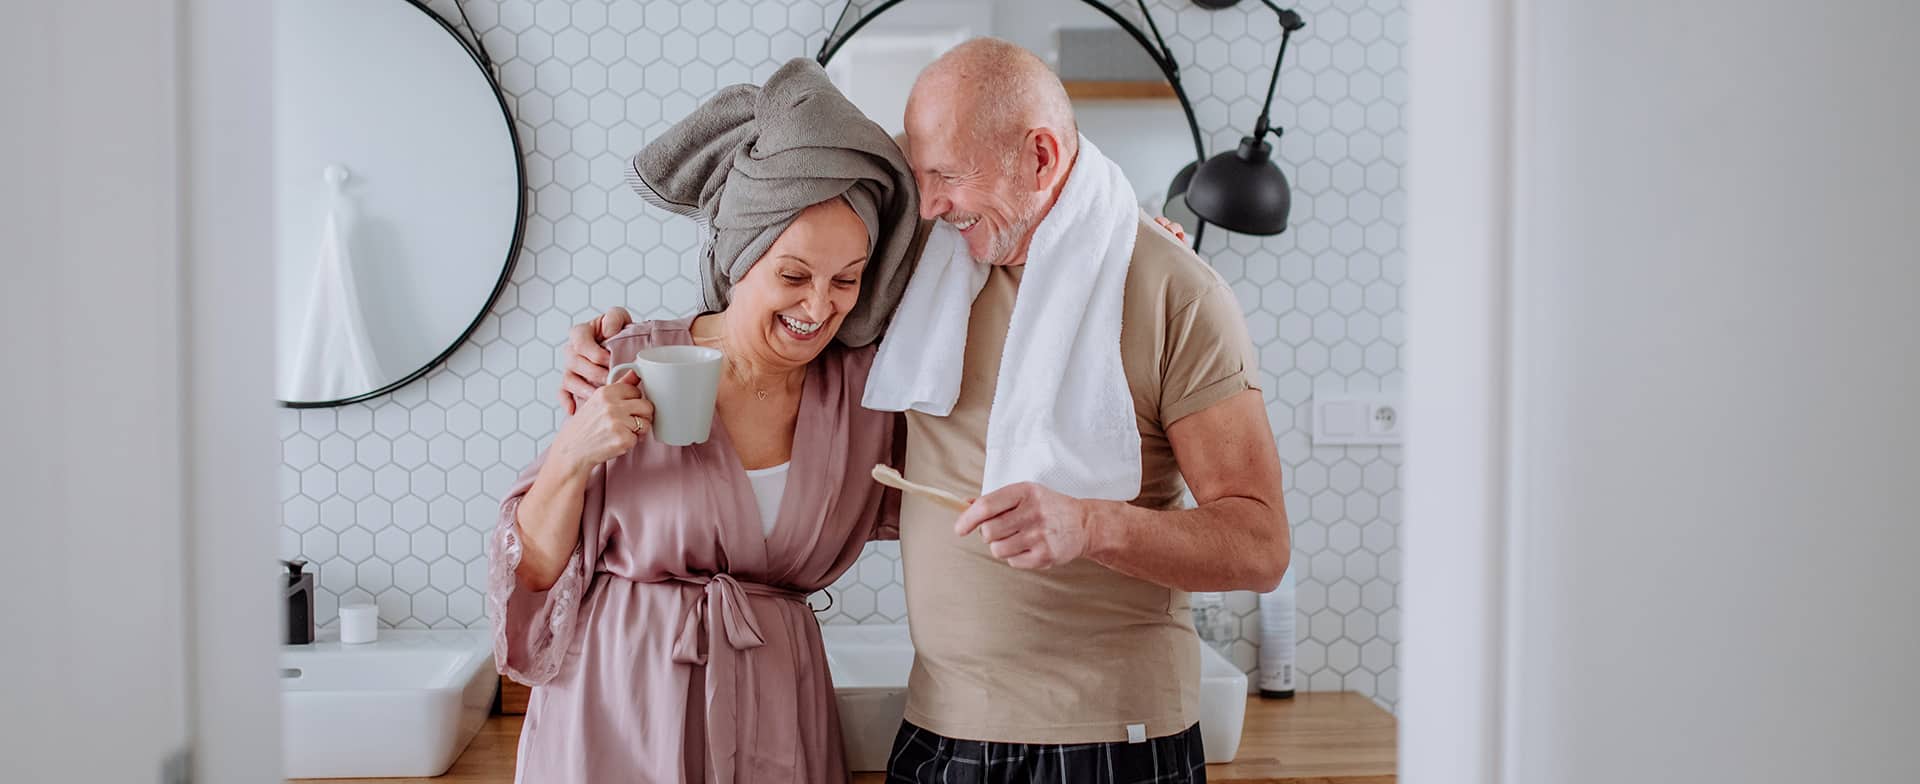 A senior couple hugging while getting ready in a renovated bathroom.